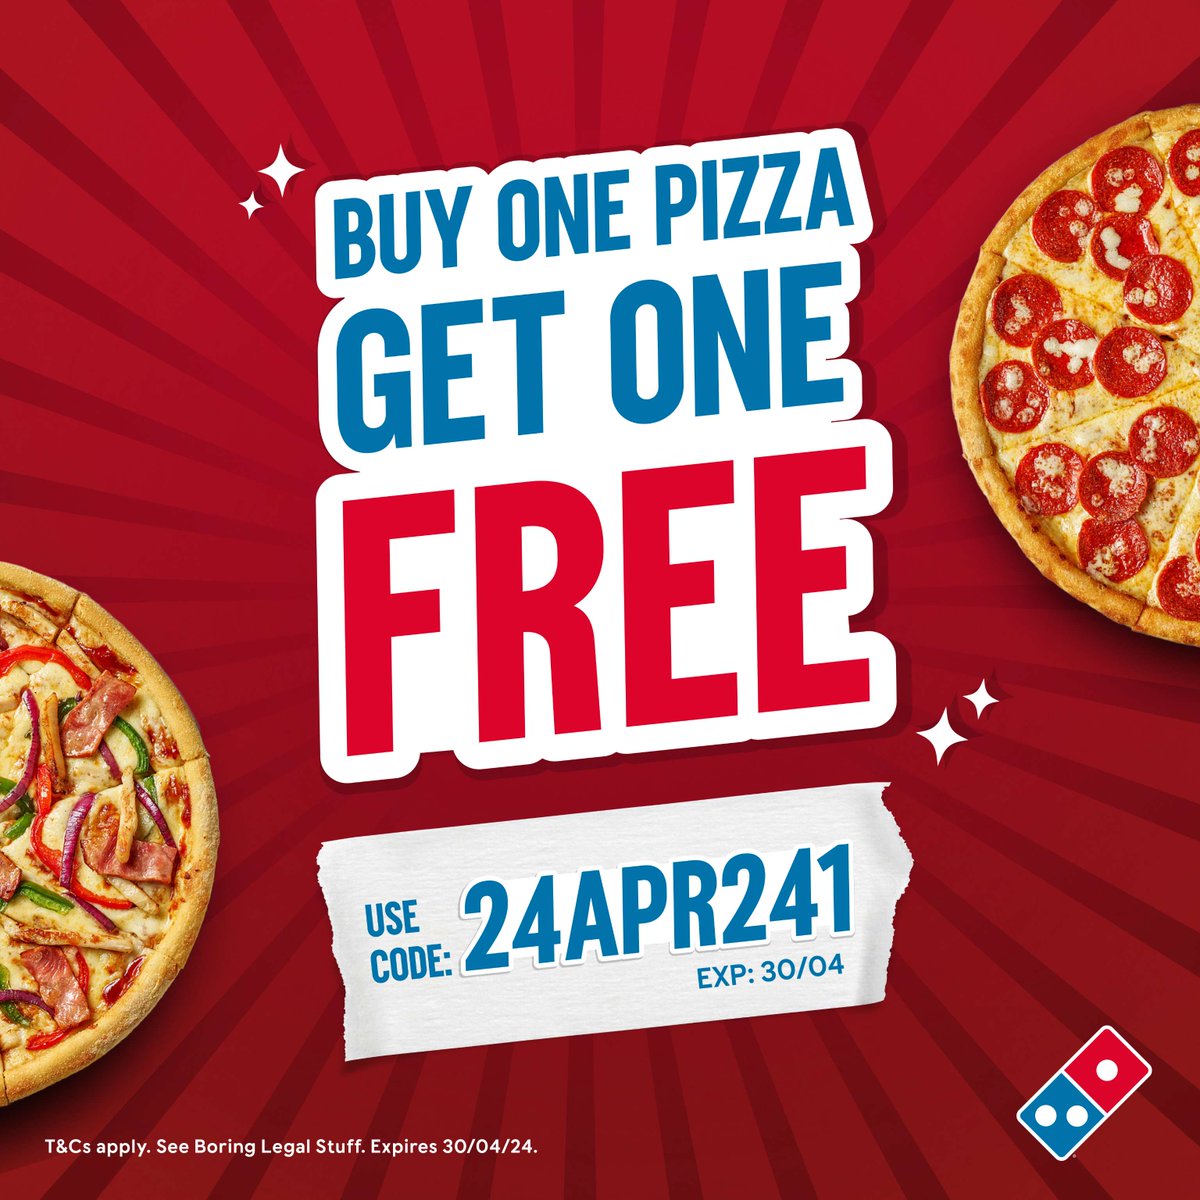 Time for a pizza pick me up 😋🥰 BUY ONE PIZZA GET ONE FREE! 😋🍕 USE CODE: 24APR241 Order online or on the Domino’s app tonight… T&Cs apply. Minimum delivery spend may apply. Expires 30/04. #AD